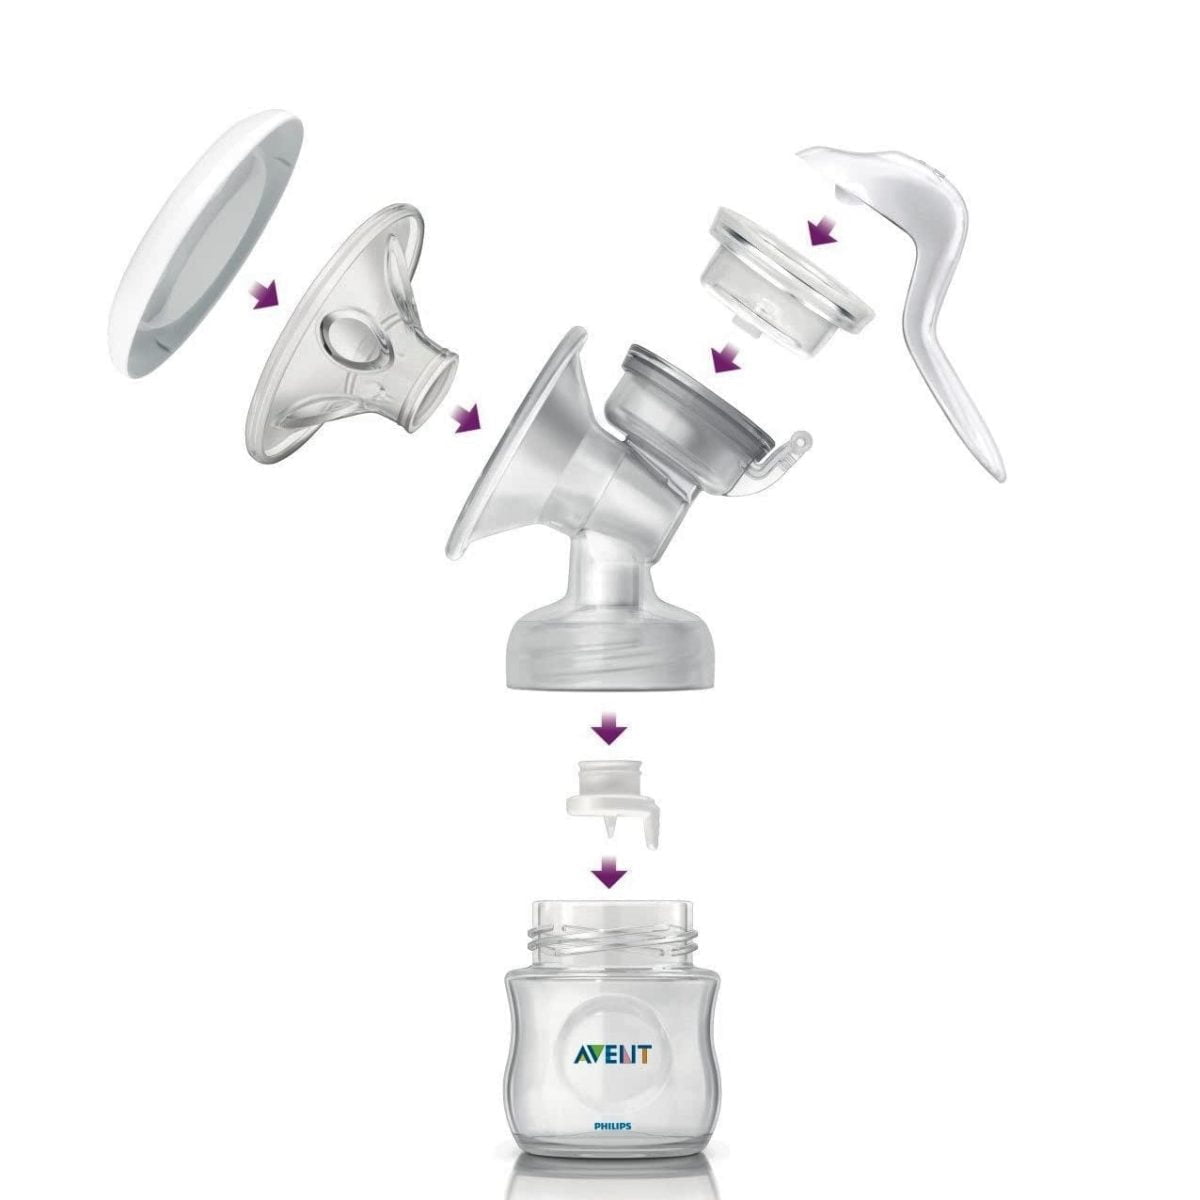 61Usptkqupl. Ac Sl1300 &Lt;H1&Gt;Philips Avent Breast Scf330/70 Pump Manual, Clear&Lt;/H1&Gt; Https://Www.youtube.com/Watch?V=Opctlnkr3Jq &Lt;Ul Class=&Quot;A-Unordered-List A-Vertical A-Spacing-Mini&Quot;&Gt; &Lt;Li&Gt;&Lt;Span Class=&Quot;A-List-Item&Quot;&Gt;Brand: Philips Avent&Lt;/Span&Gt;&Lt;/Li&Gt; &Lt;Li&Gt;&Lt;Span Class=&Quot;A-List-Item&Quot;&Gt;Type: Breast Pump&Lt;/Span&Gt;&Lt;/Li&Gt; &Lt;Li&Gt;&Lt;Span Class=&Quot;A-List-Item&Quot;&Gt;Made Up Of Bpa Free Materials&Lt;/Span&Gt;&Lt;/Li&Gt; &Lt;Li&Gt;&Lt;Span Class=&Quot;A-List-Item&Quot;&Gt;The Soft Cushion Comfortably Cradles Your Breast For A Fluid And Pleasant Experience&Lt;/Span&Gt;&Lt;/Li&Gt; &Lt;/Ul&Gt; Massage Cushion Has A New Soft Velvety Texture That Gives A Warm Feel To The Skin For Comfortable, Gentle Stimulation Of Your Milk Flow. The Cushion Is Designed To Gently Mimic Your Baby'S Suckling To Help Stimulate Let Down. The Wide Breast Shaped Nipple Promotes Natural Latch On Similar To The Breast, Making It Easy For Your Baby To Combine Breast And Bottle Feeding. Breast Pump Philips Avent Manual Breast Pump